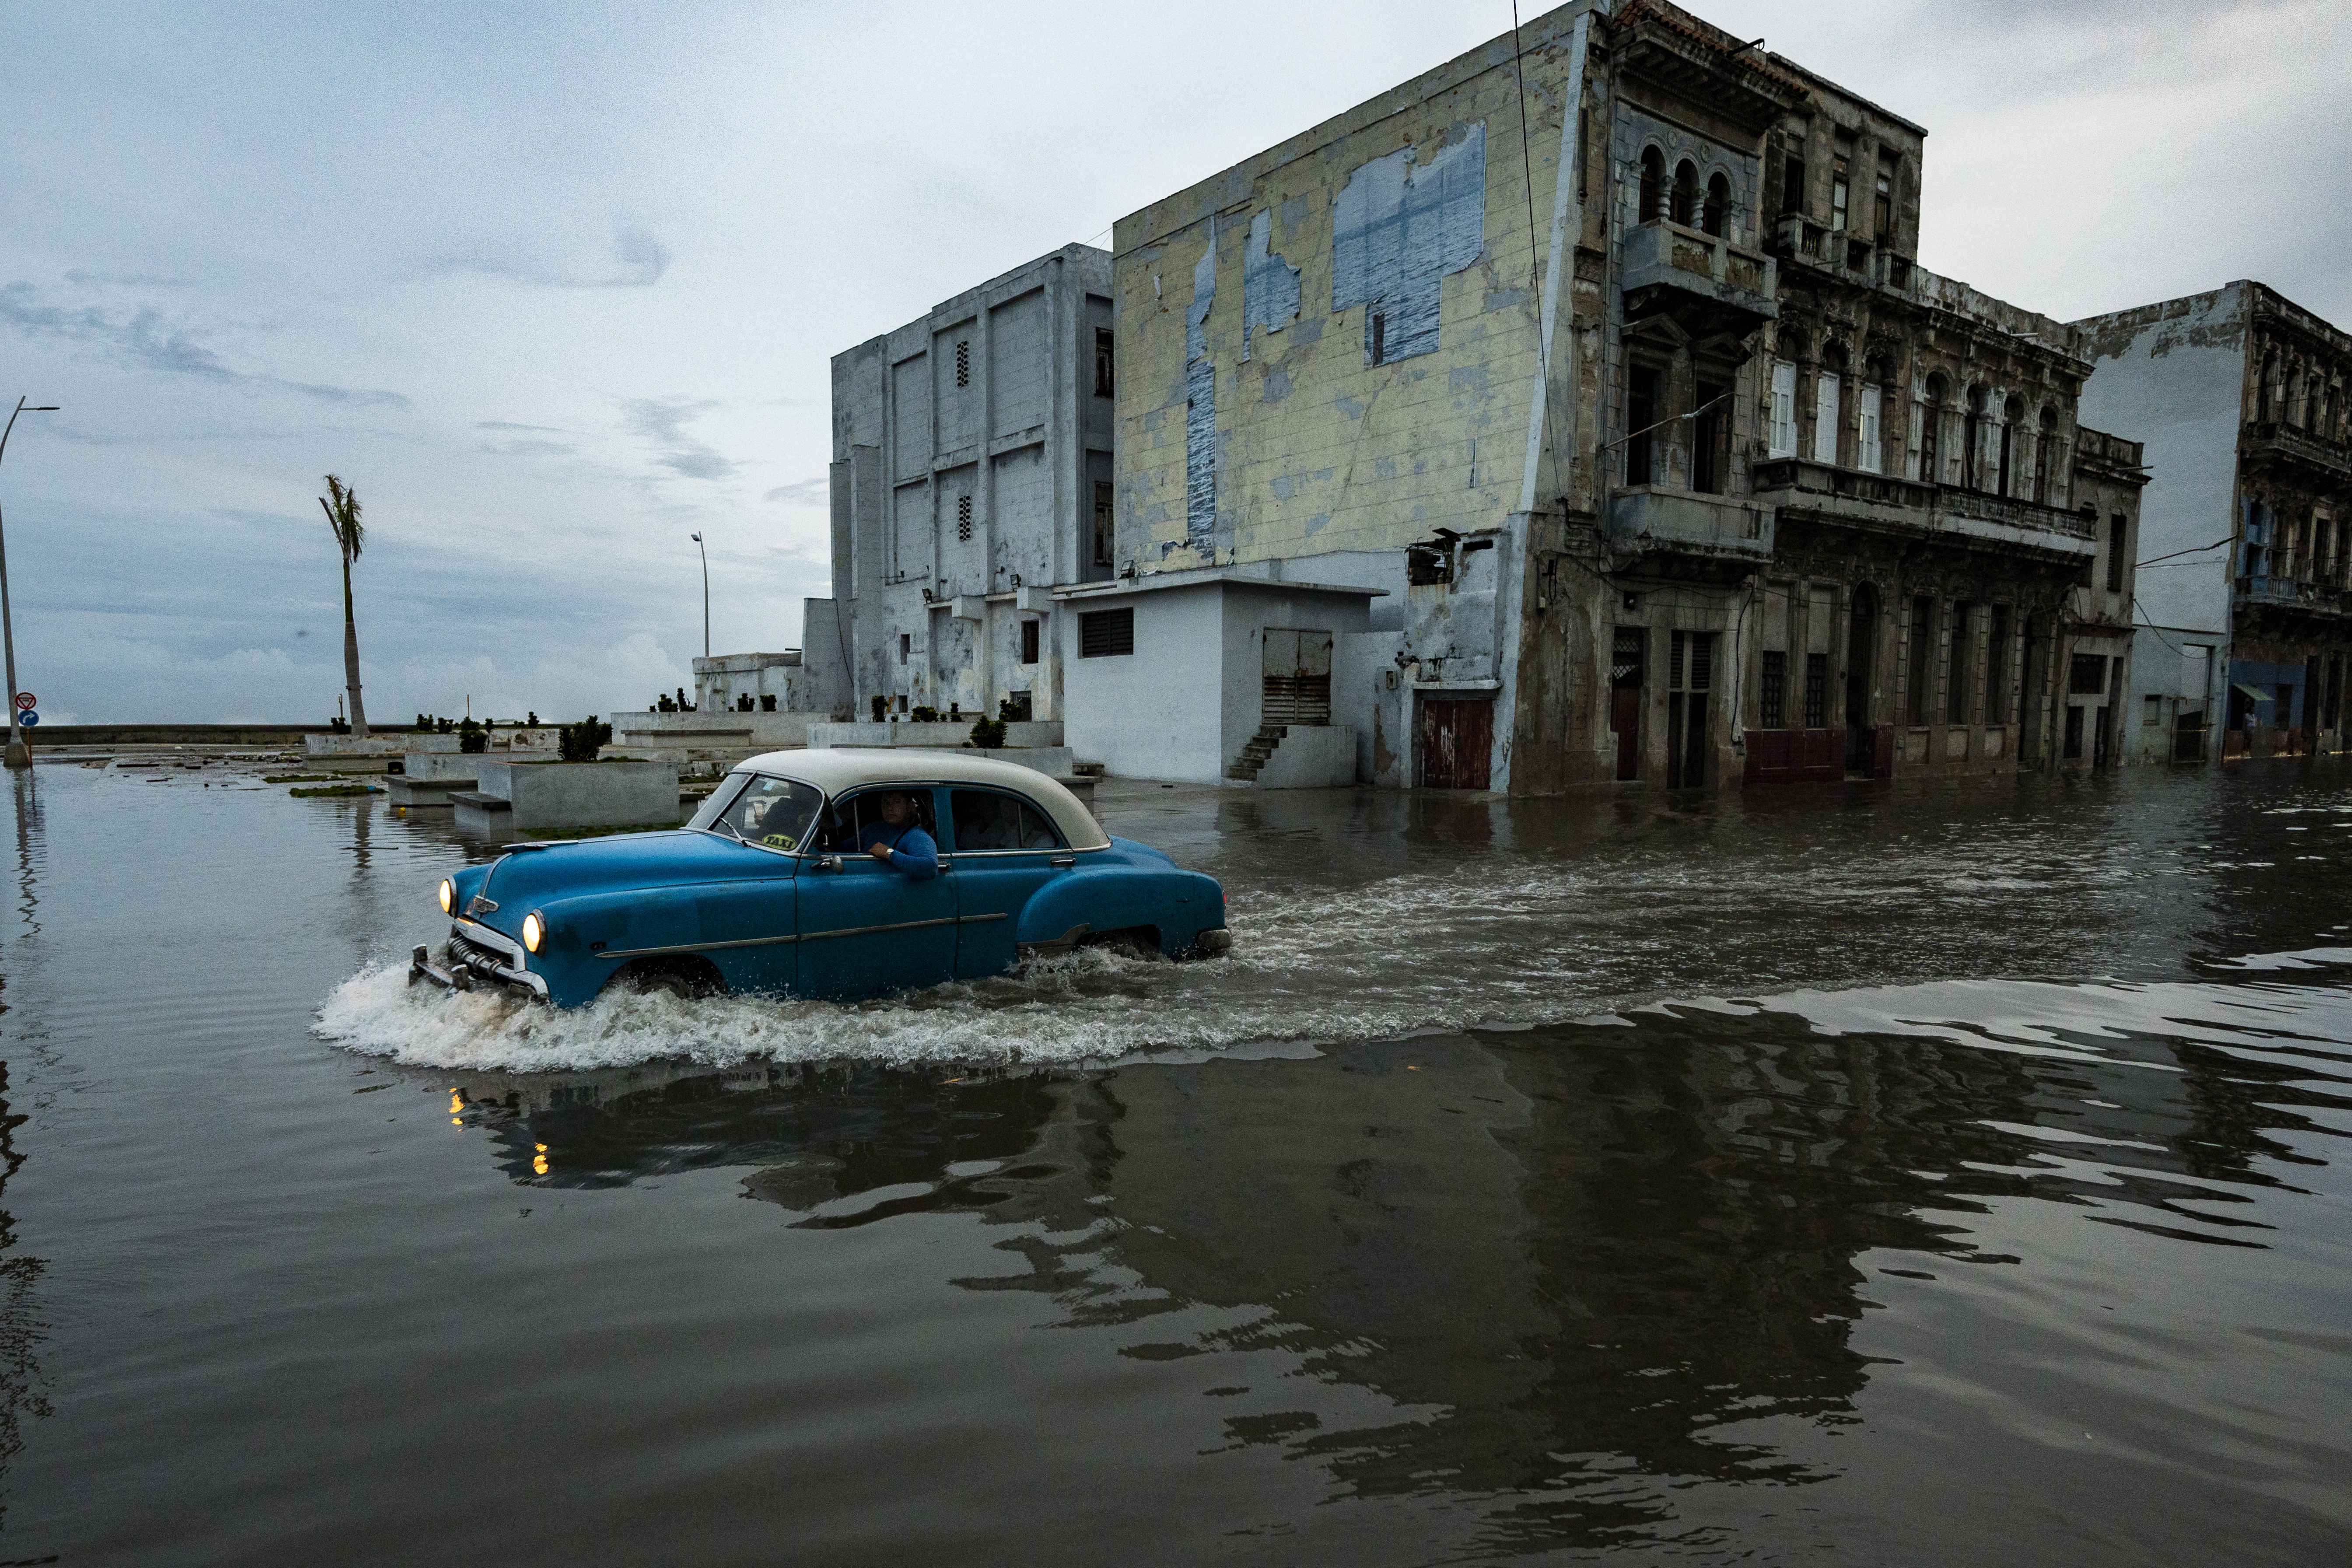 An old American car passes through a flooded street in Havana, on September 28, 2022, after the passage of hurricane Ian. - Cuba exceeded 12 hours this Wednesday in total blackout with "zero electricity generation" due to failures in the links of the national electrical system (sen), after the passage of powerful Hurricane Ian. (Photo by YAMIL LAGE / AFP)